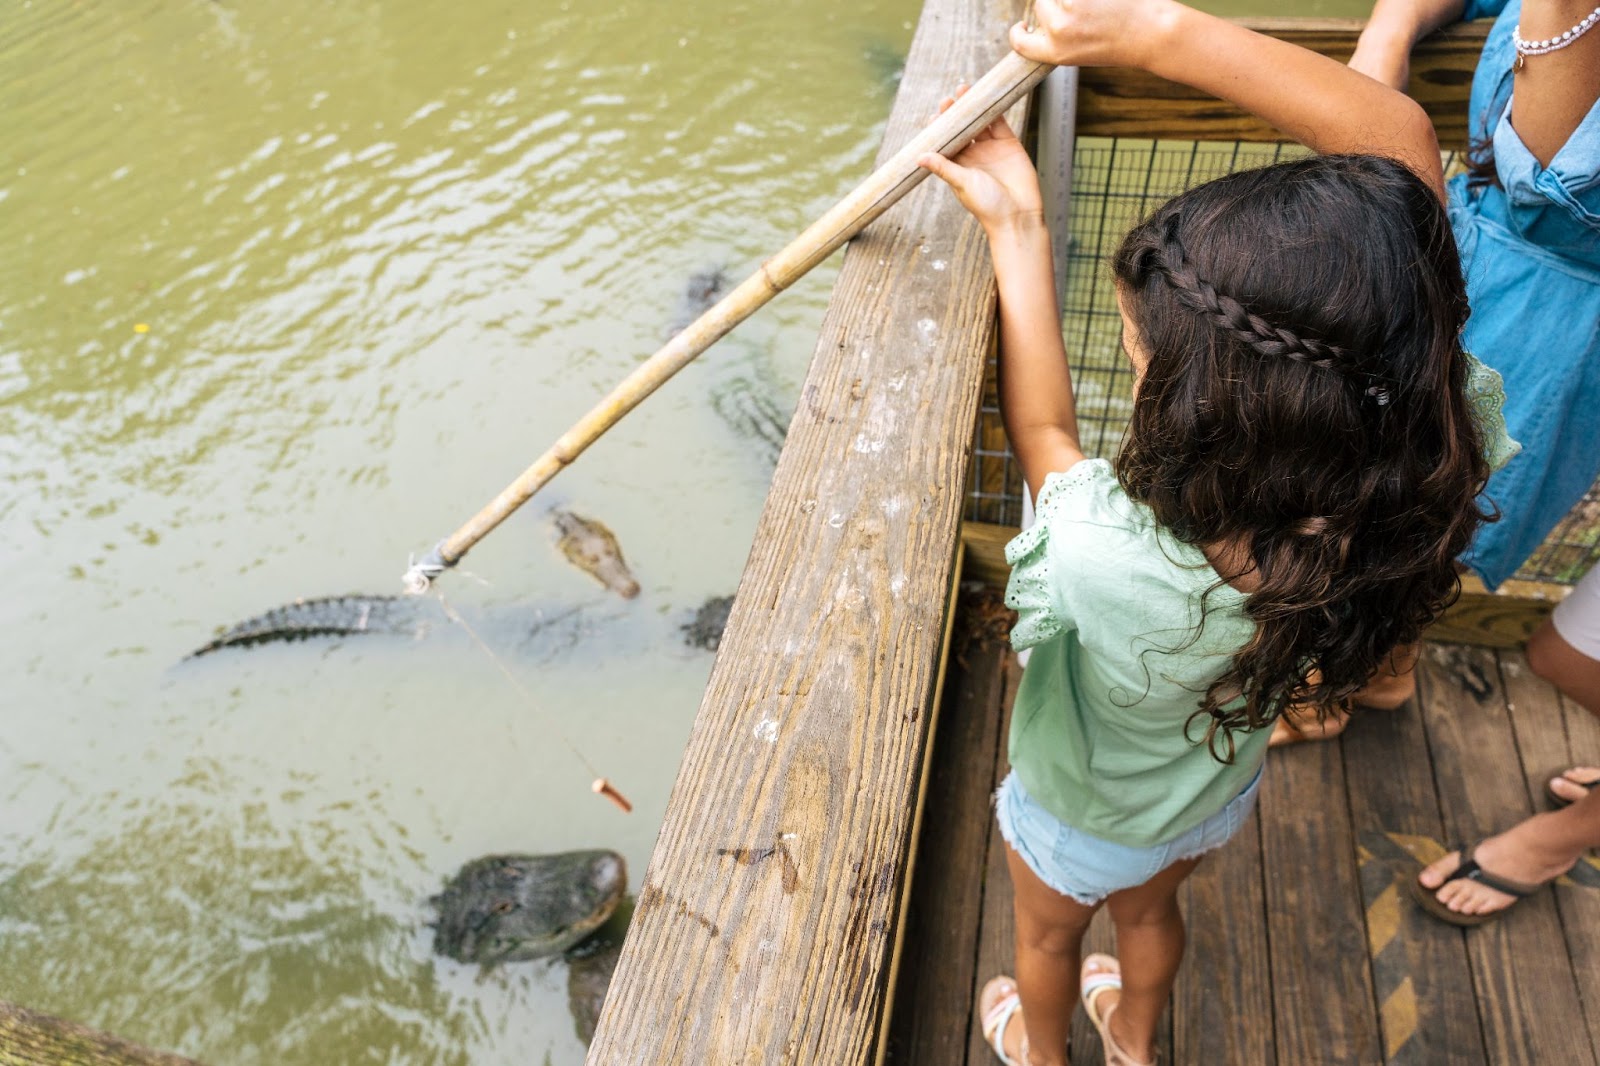 A young girl feeds alligators at Wild Florida